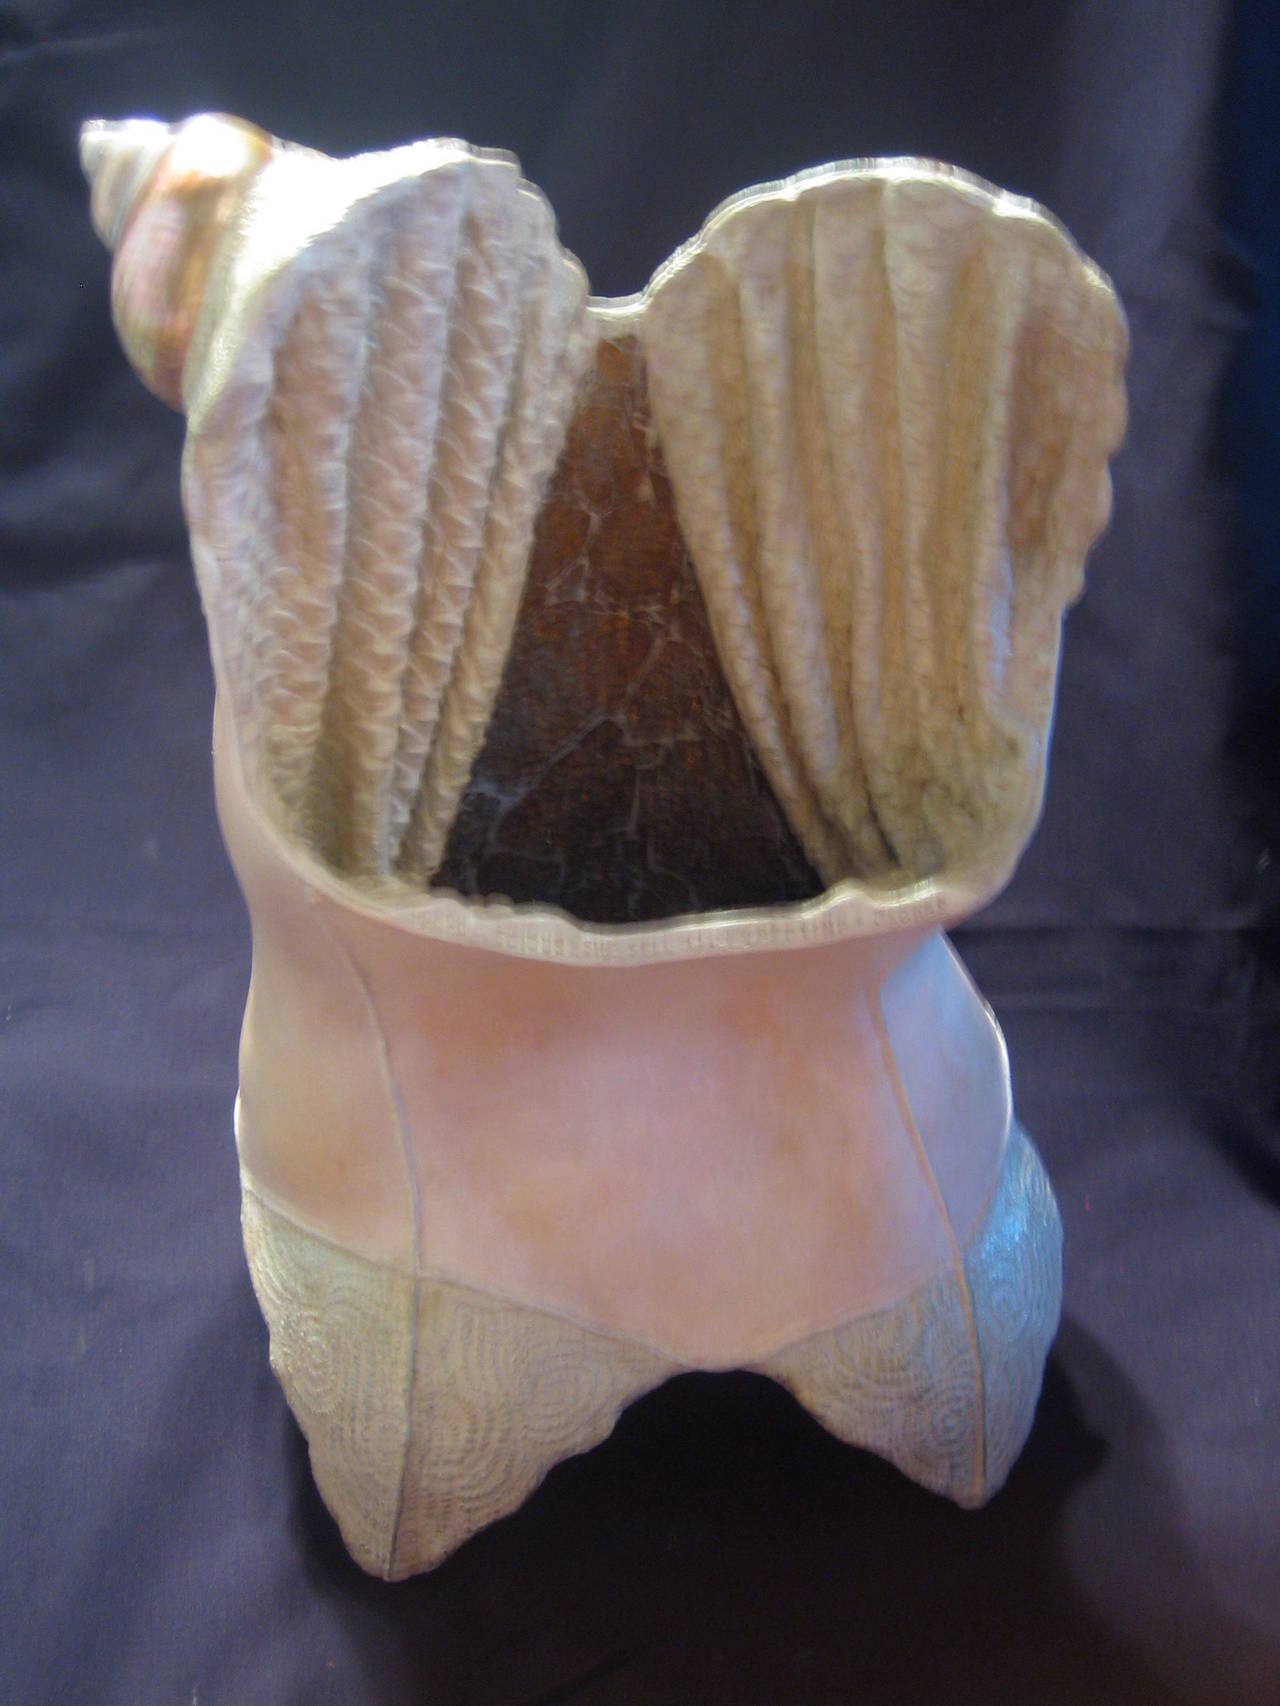 A CONCH-SCIOUS SHE SELL - Contemporary Sculpture by Laura Ann Jacobs